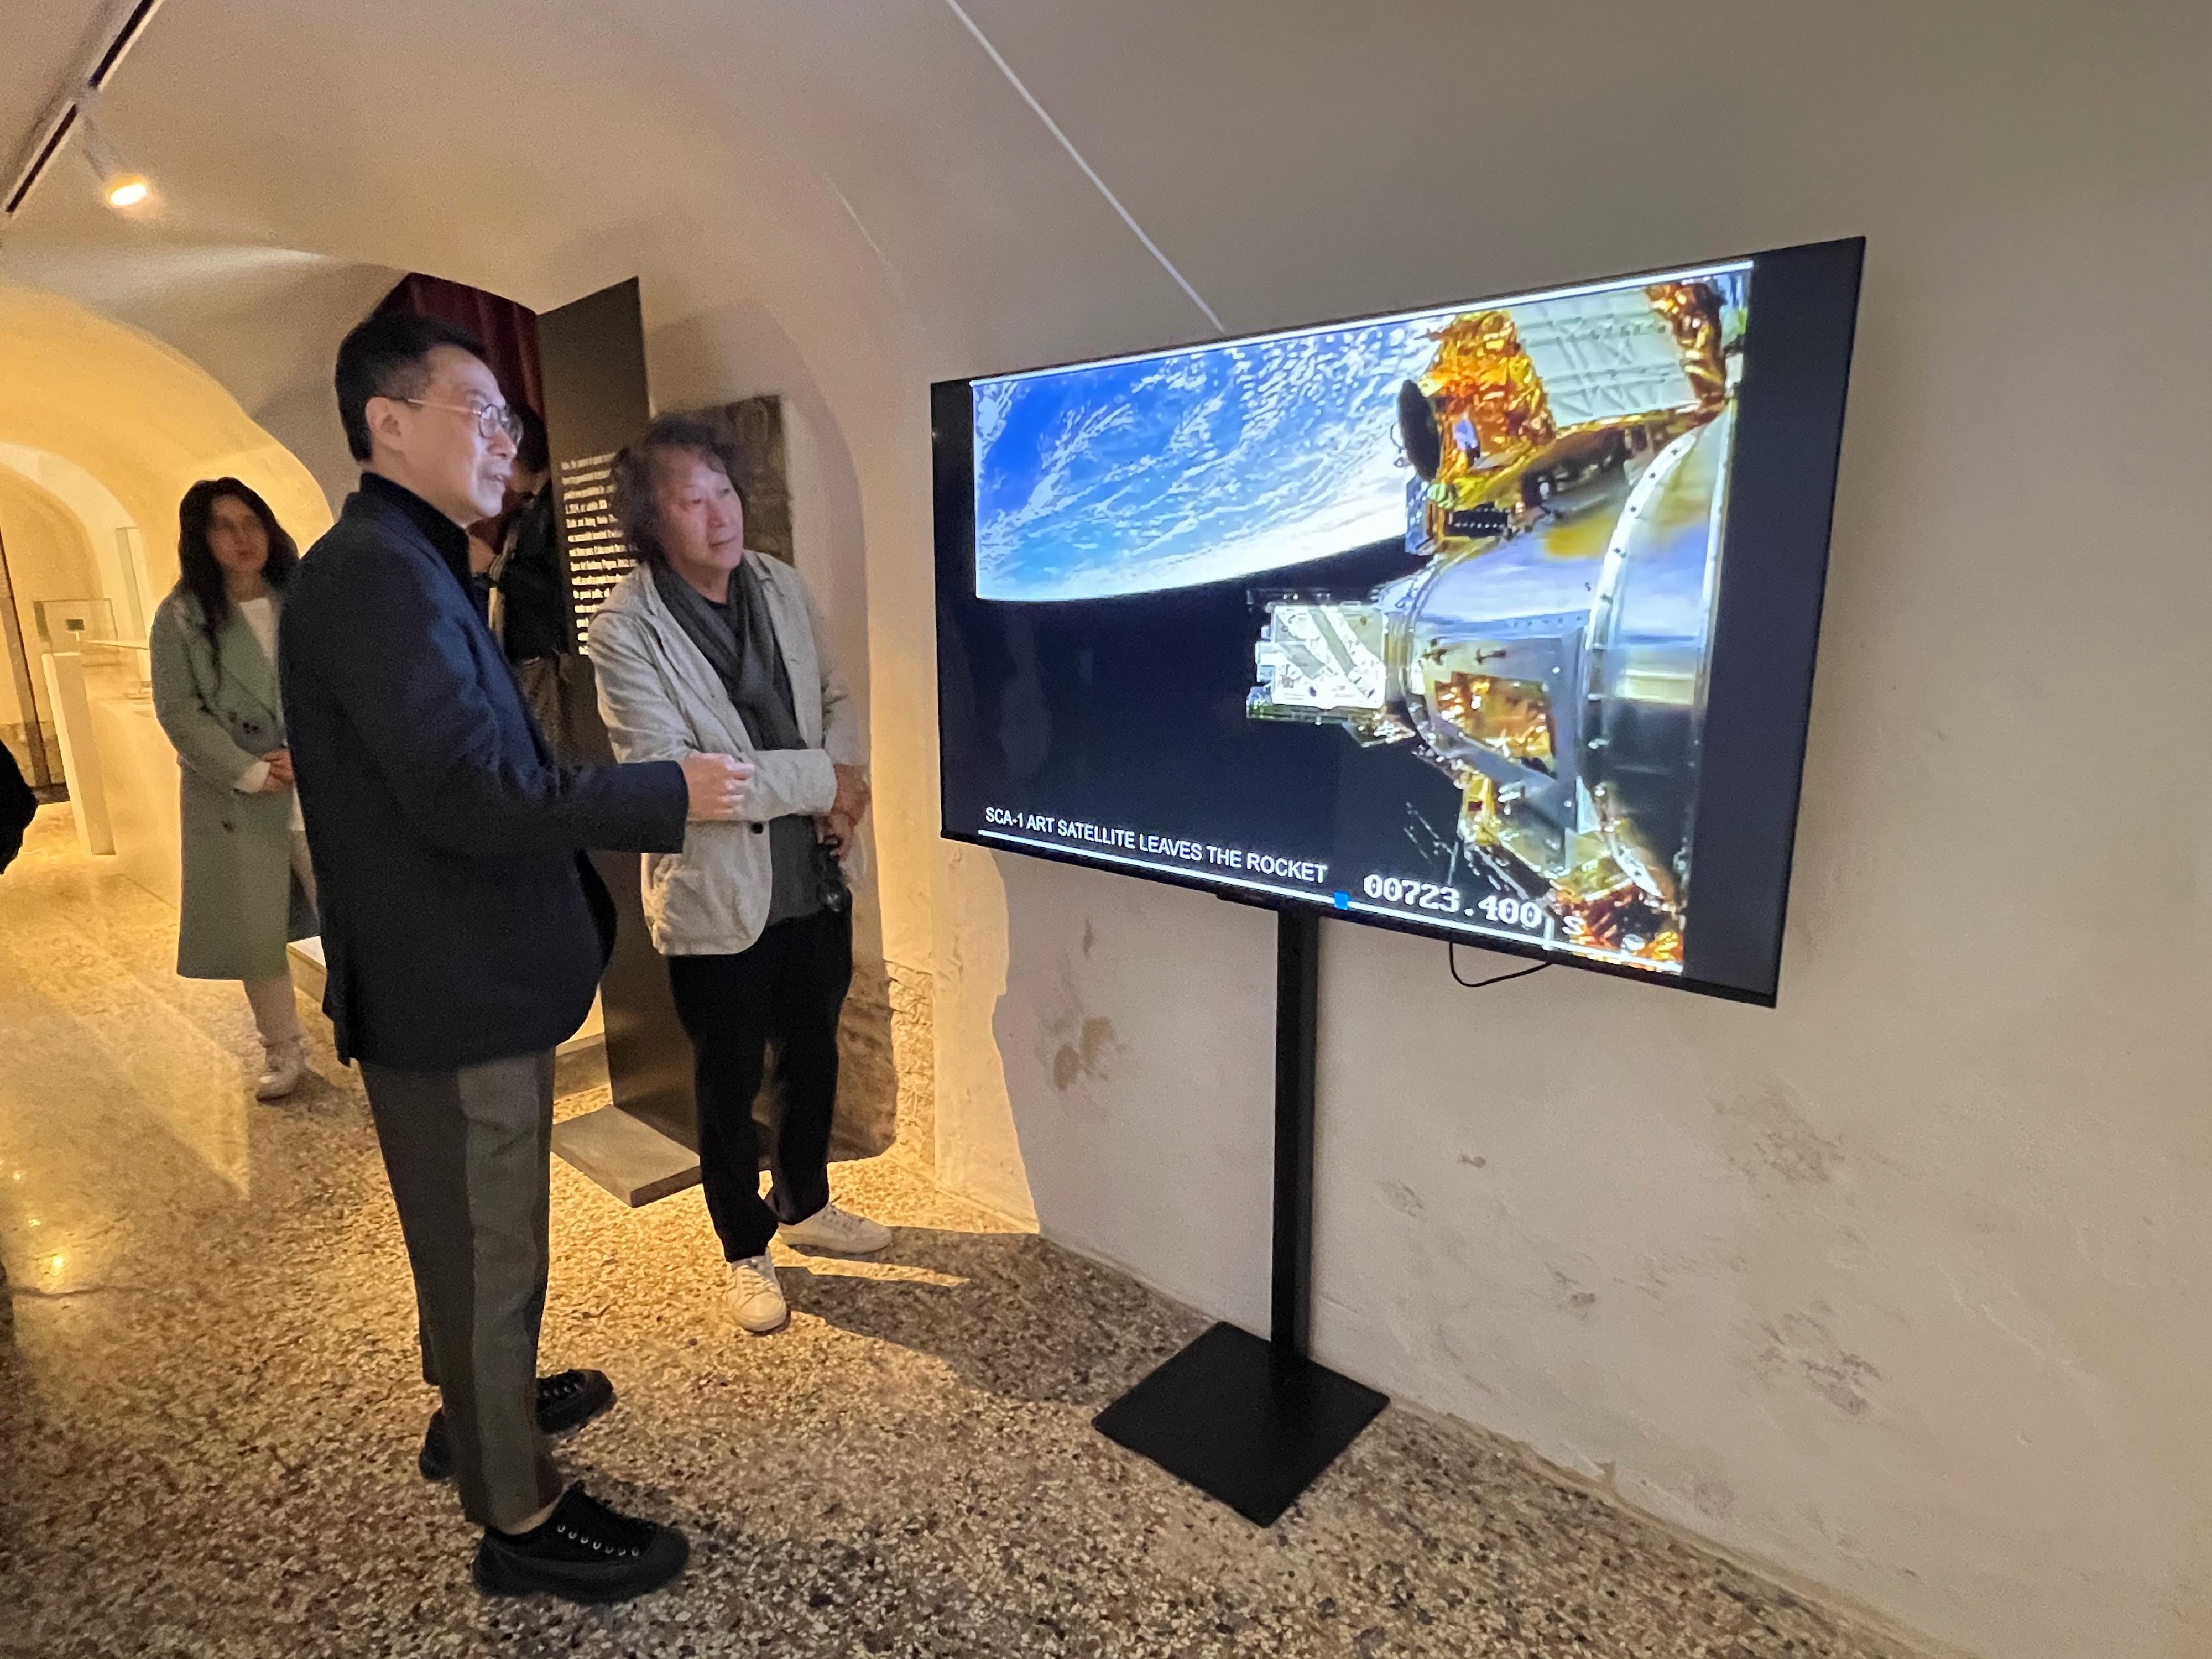 The Secretary for Culture, Sports and Tourism, Mr Kevin Yeung (centre), visited the art exhibition of the Ambassador for Cultural Promotion appointed by the Culture, Sports and Tourism Bureau, Mr Xu Bing (right), at the Venice Biennale in Venice, Italy, today (April 20, Venice time).